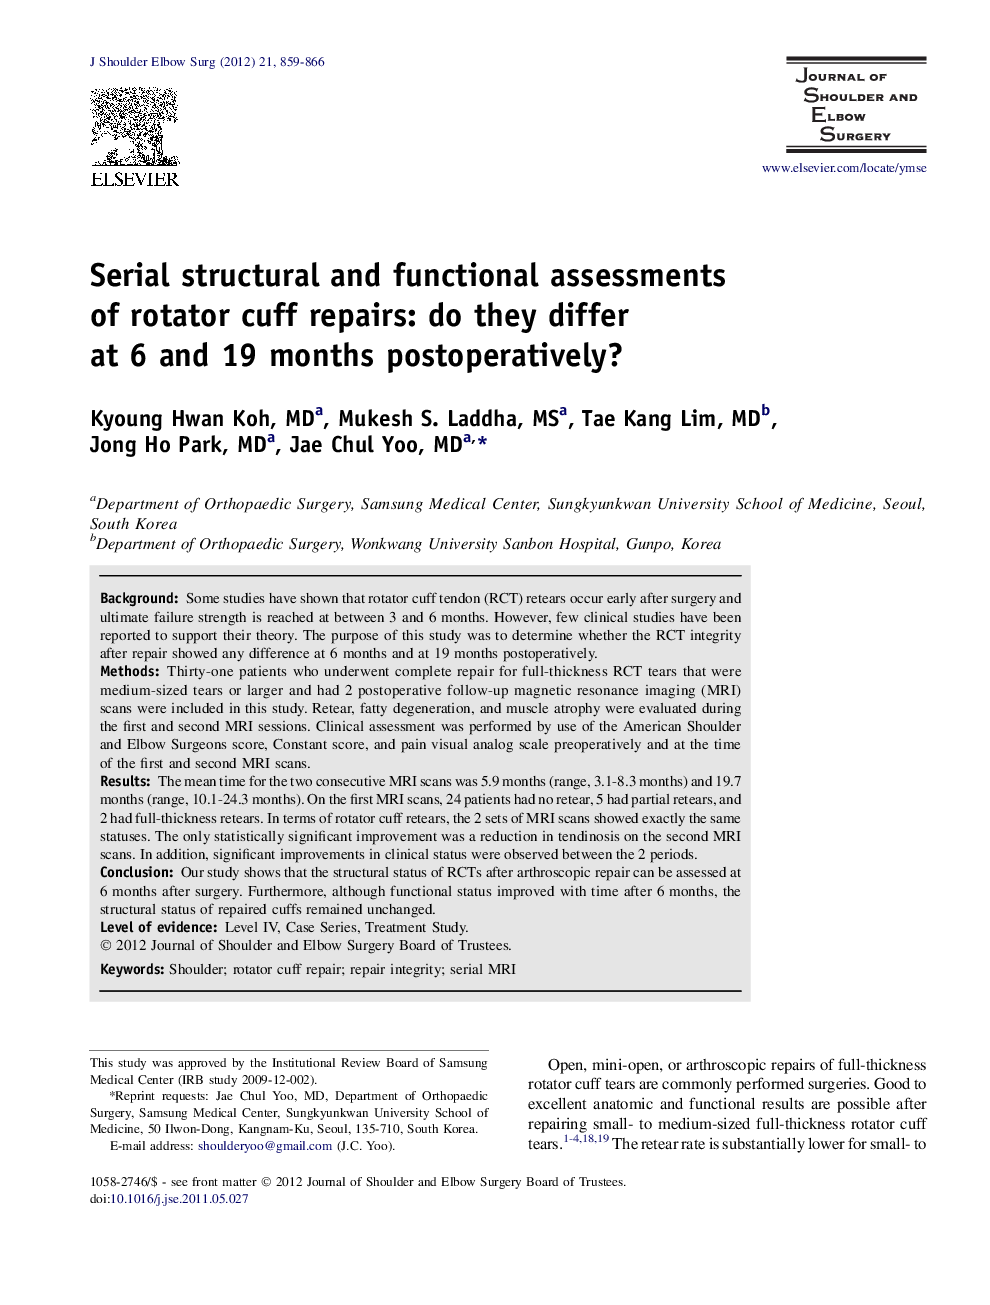 Serial structural and functional assessments of rotator cuff repairs: do they differ at 6 and 19 months postoperatively? 